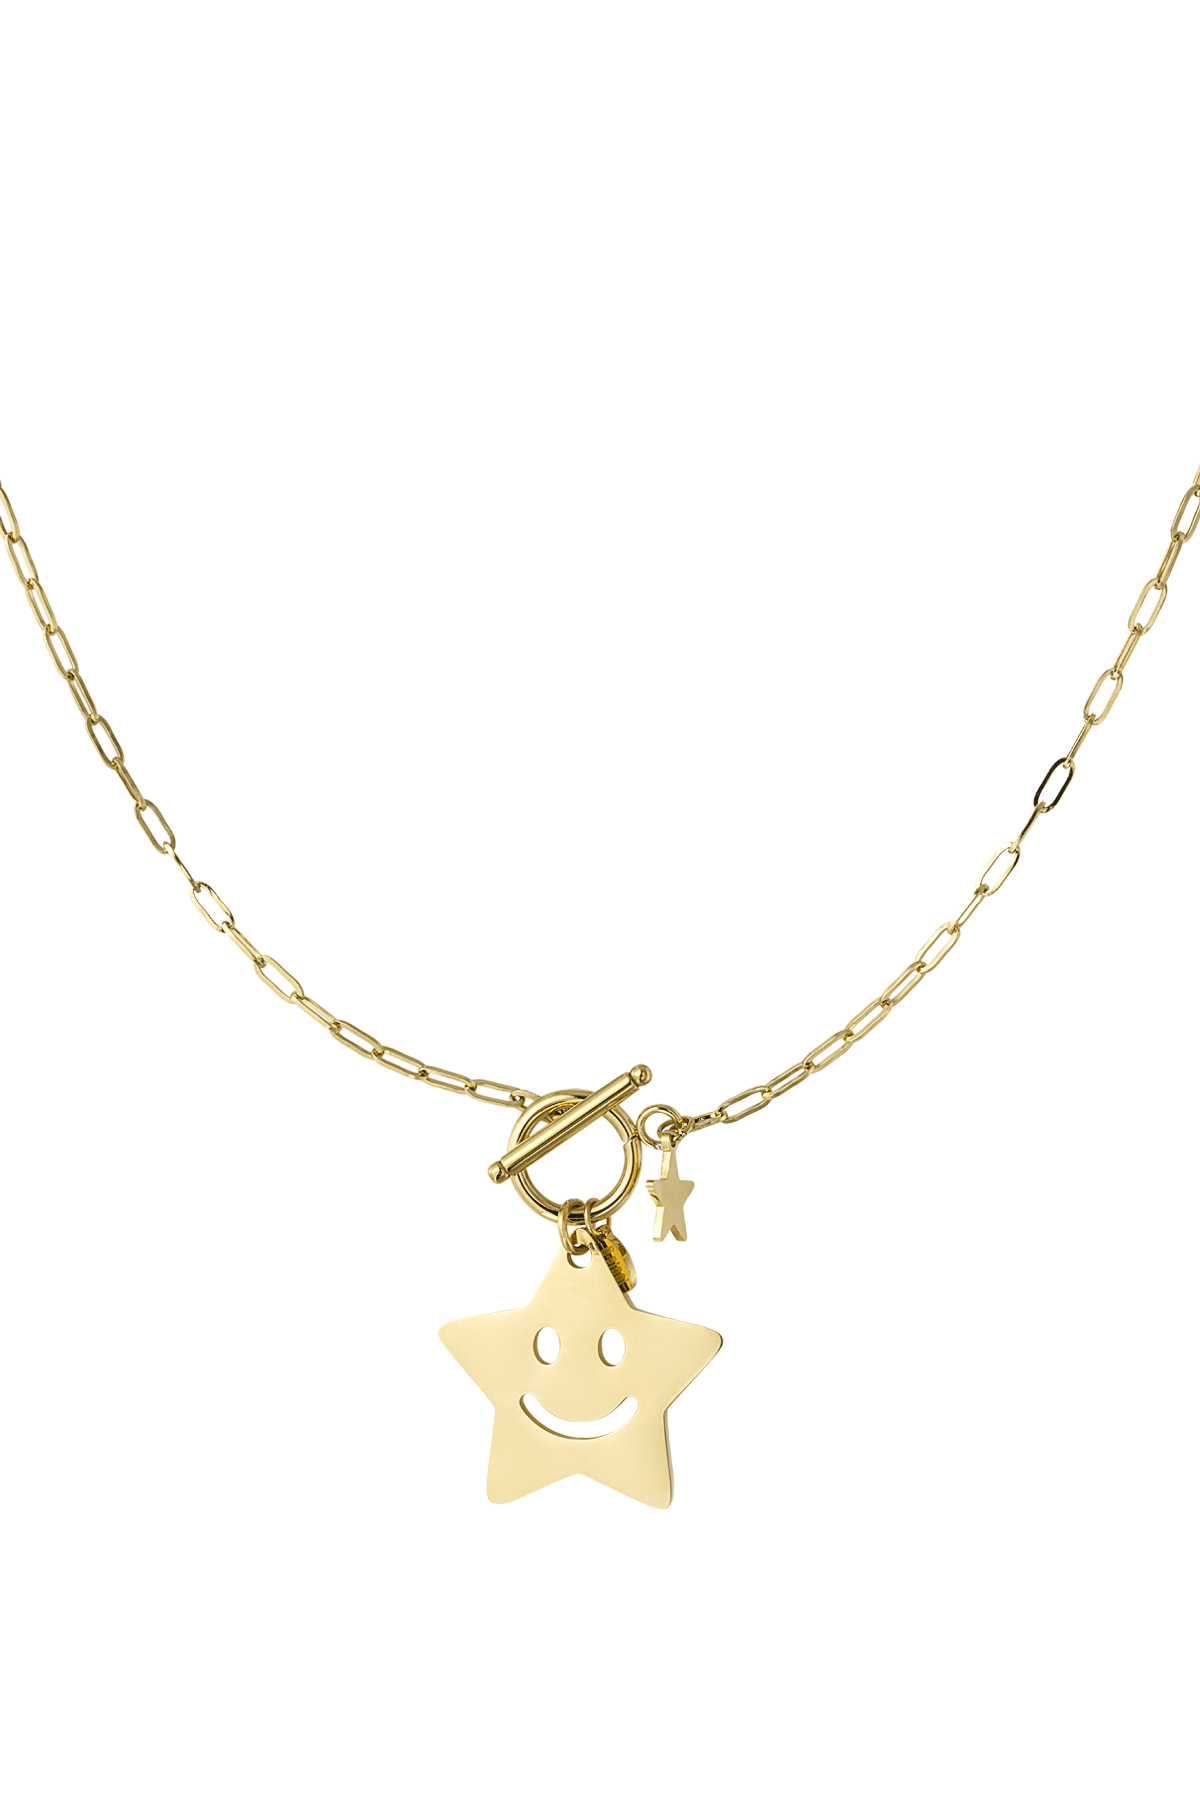 Happy star necklace - gold  